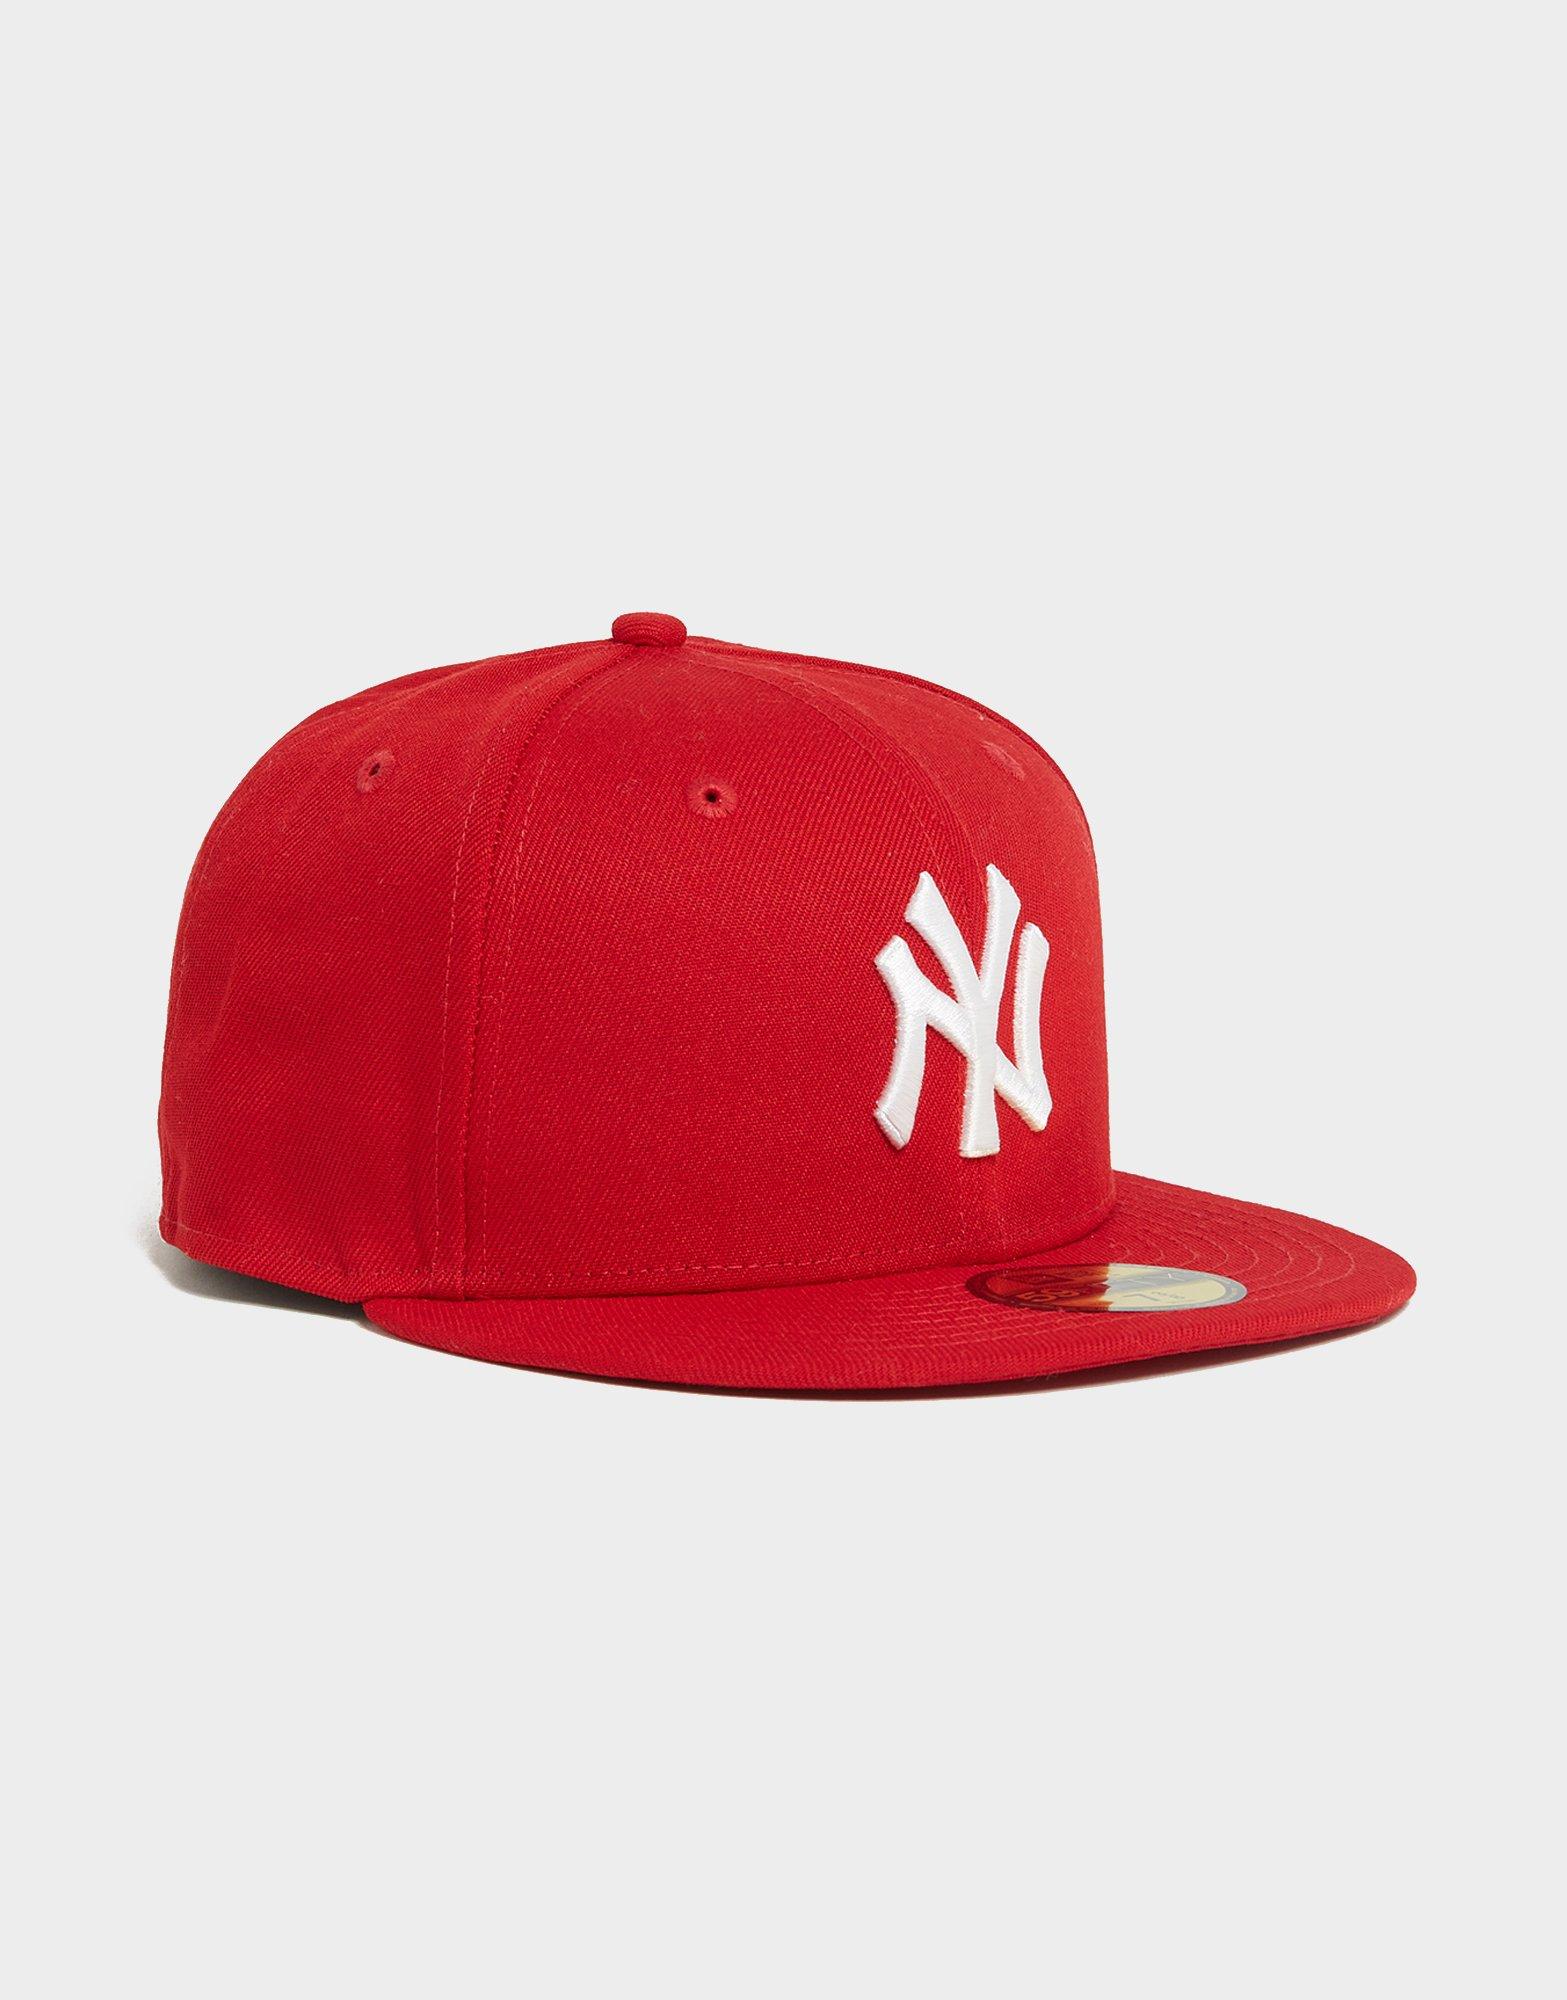 New Era Official MLB New York Yankees 59Fifty Fitted Hat Genuine Merchandise